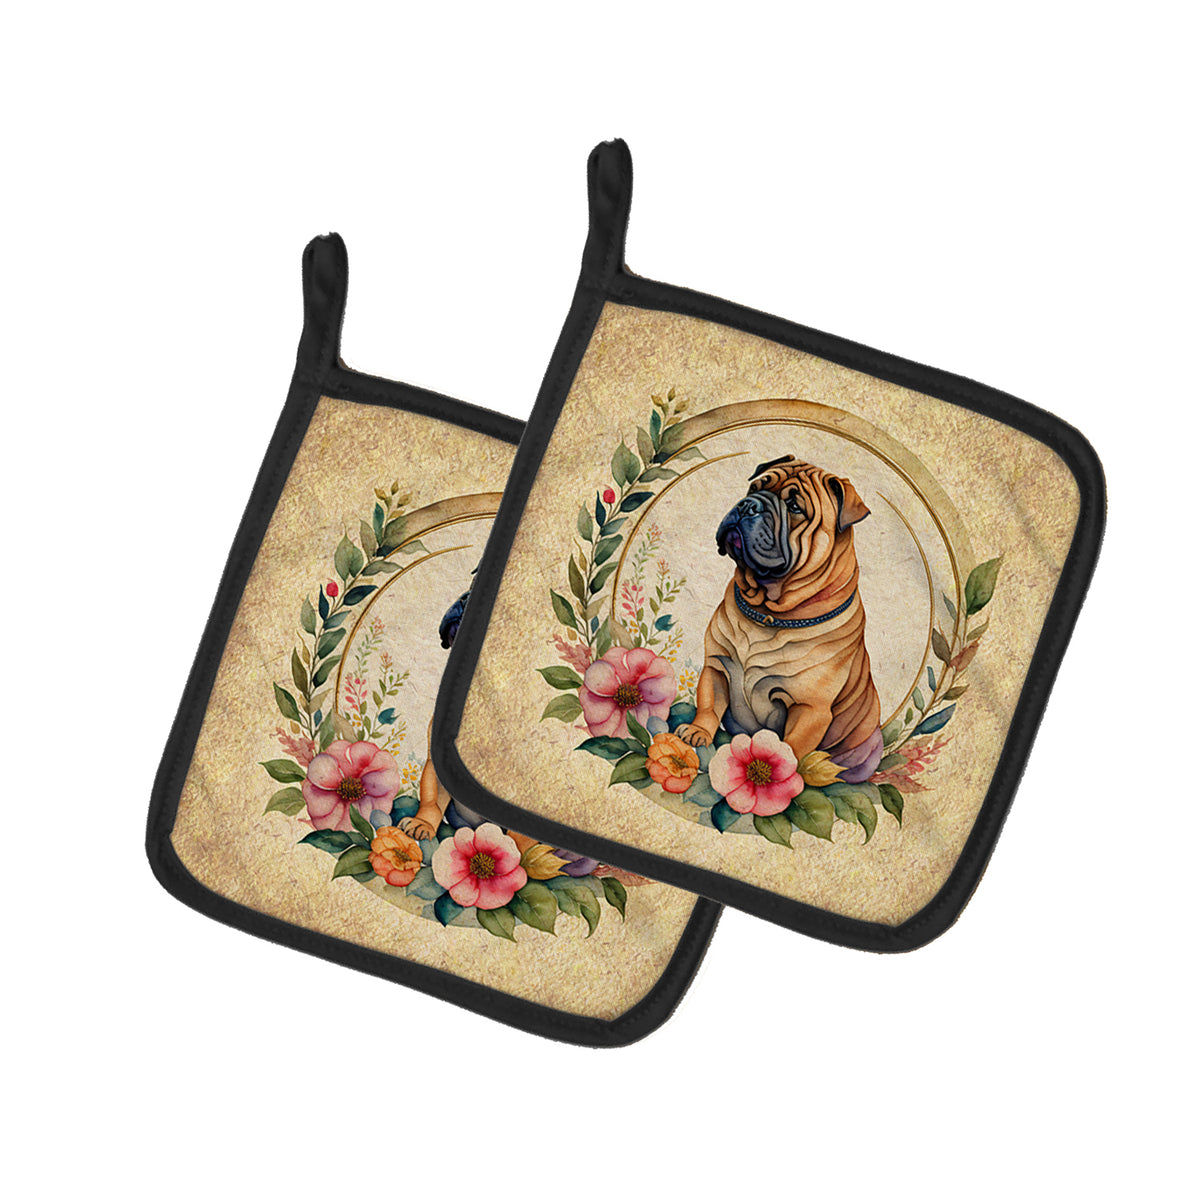 Buy this Shar Pei and Flowers Pair of Pot Holders